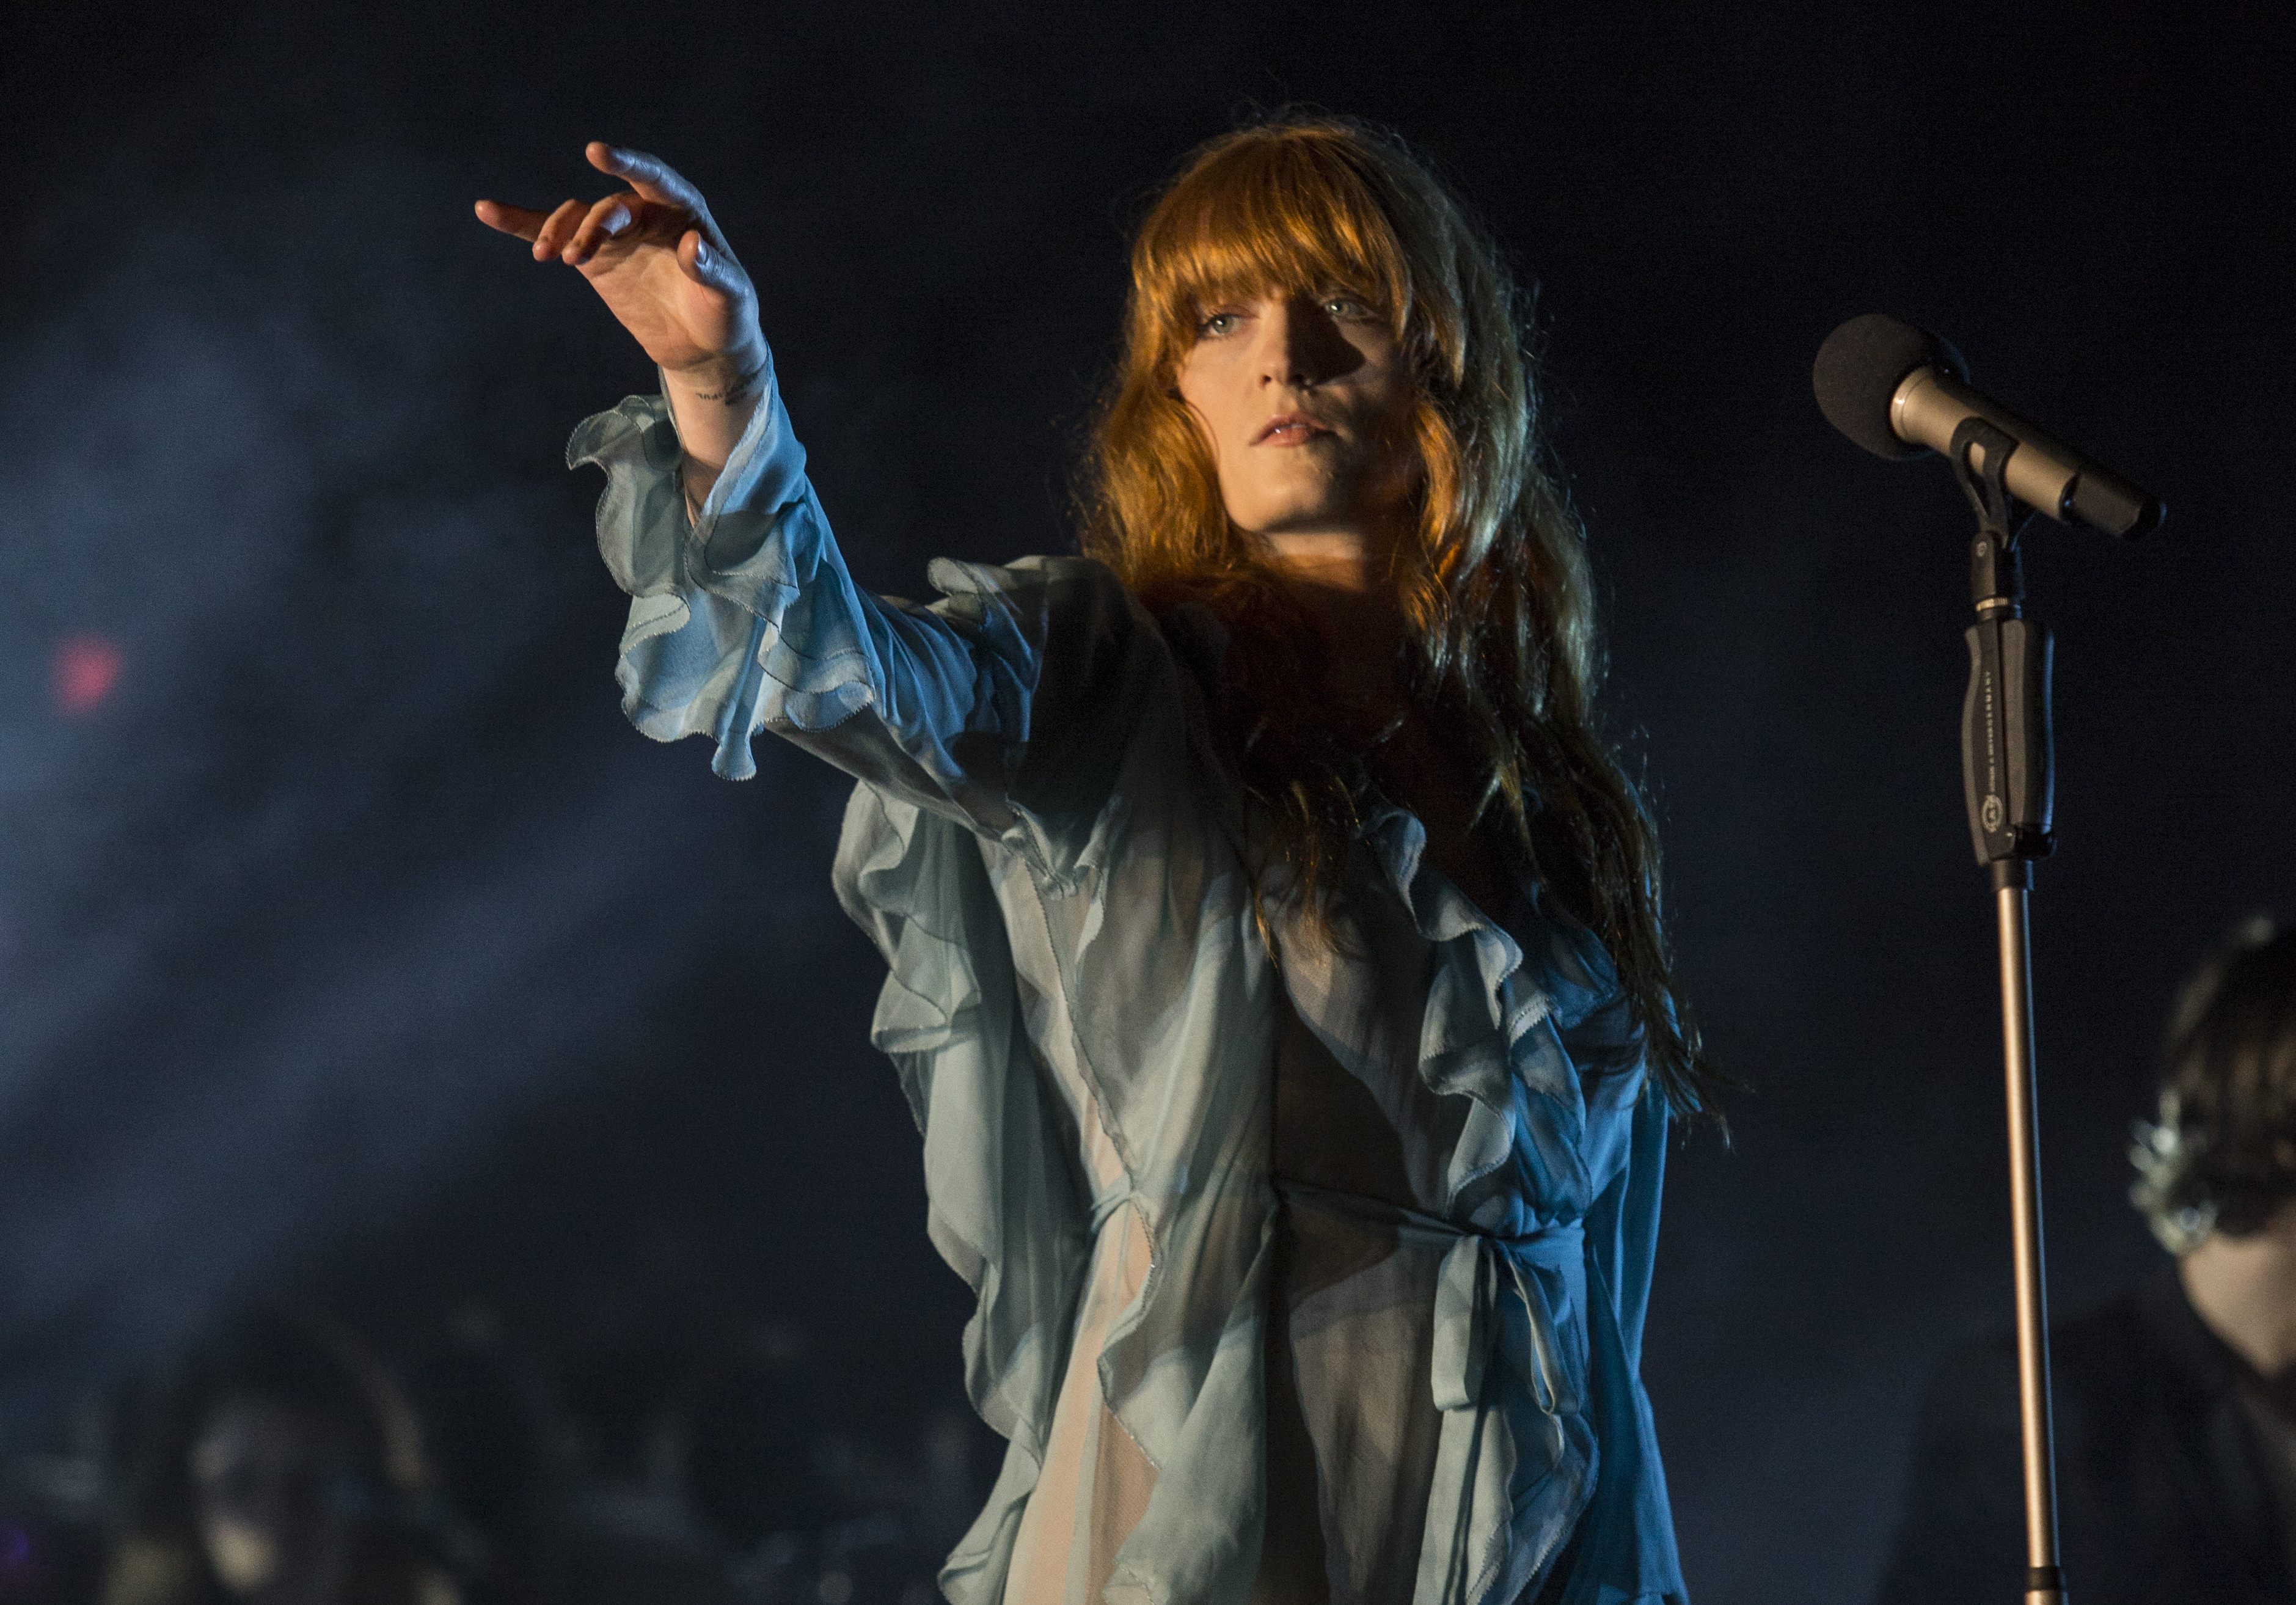 SAO PAULO, BRAZIL - MARCH 13: Florence Welch from Florence and The Machine performs at 2016 Lollapalooza at Autodromo de Interlagos on March 13, 2016 in Sao Paulo, Brazil. (Photo by Raphael Dias/Getty Images)